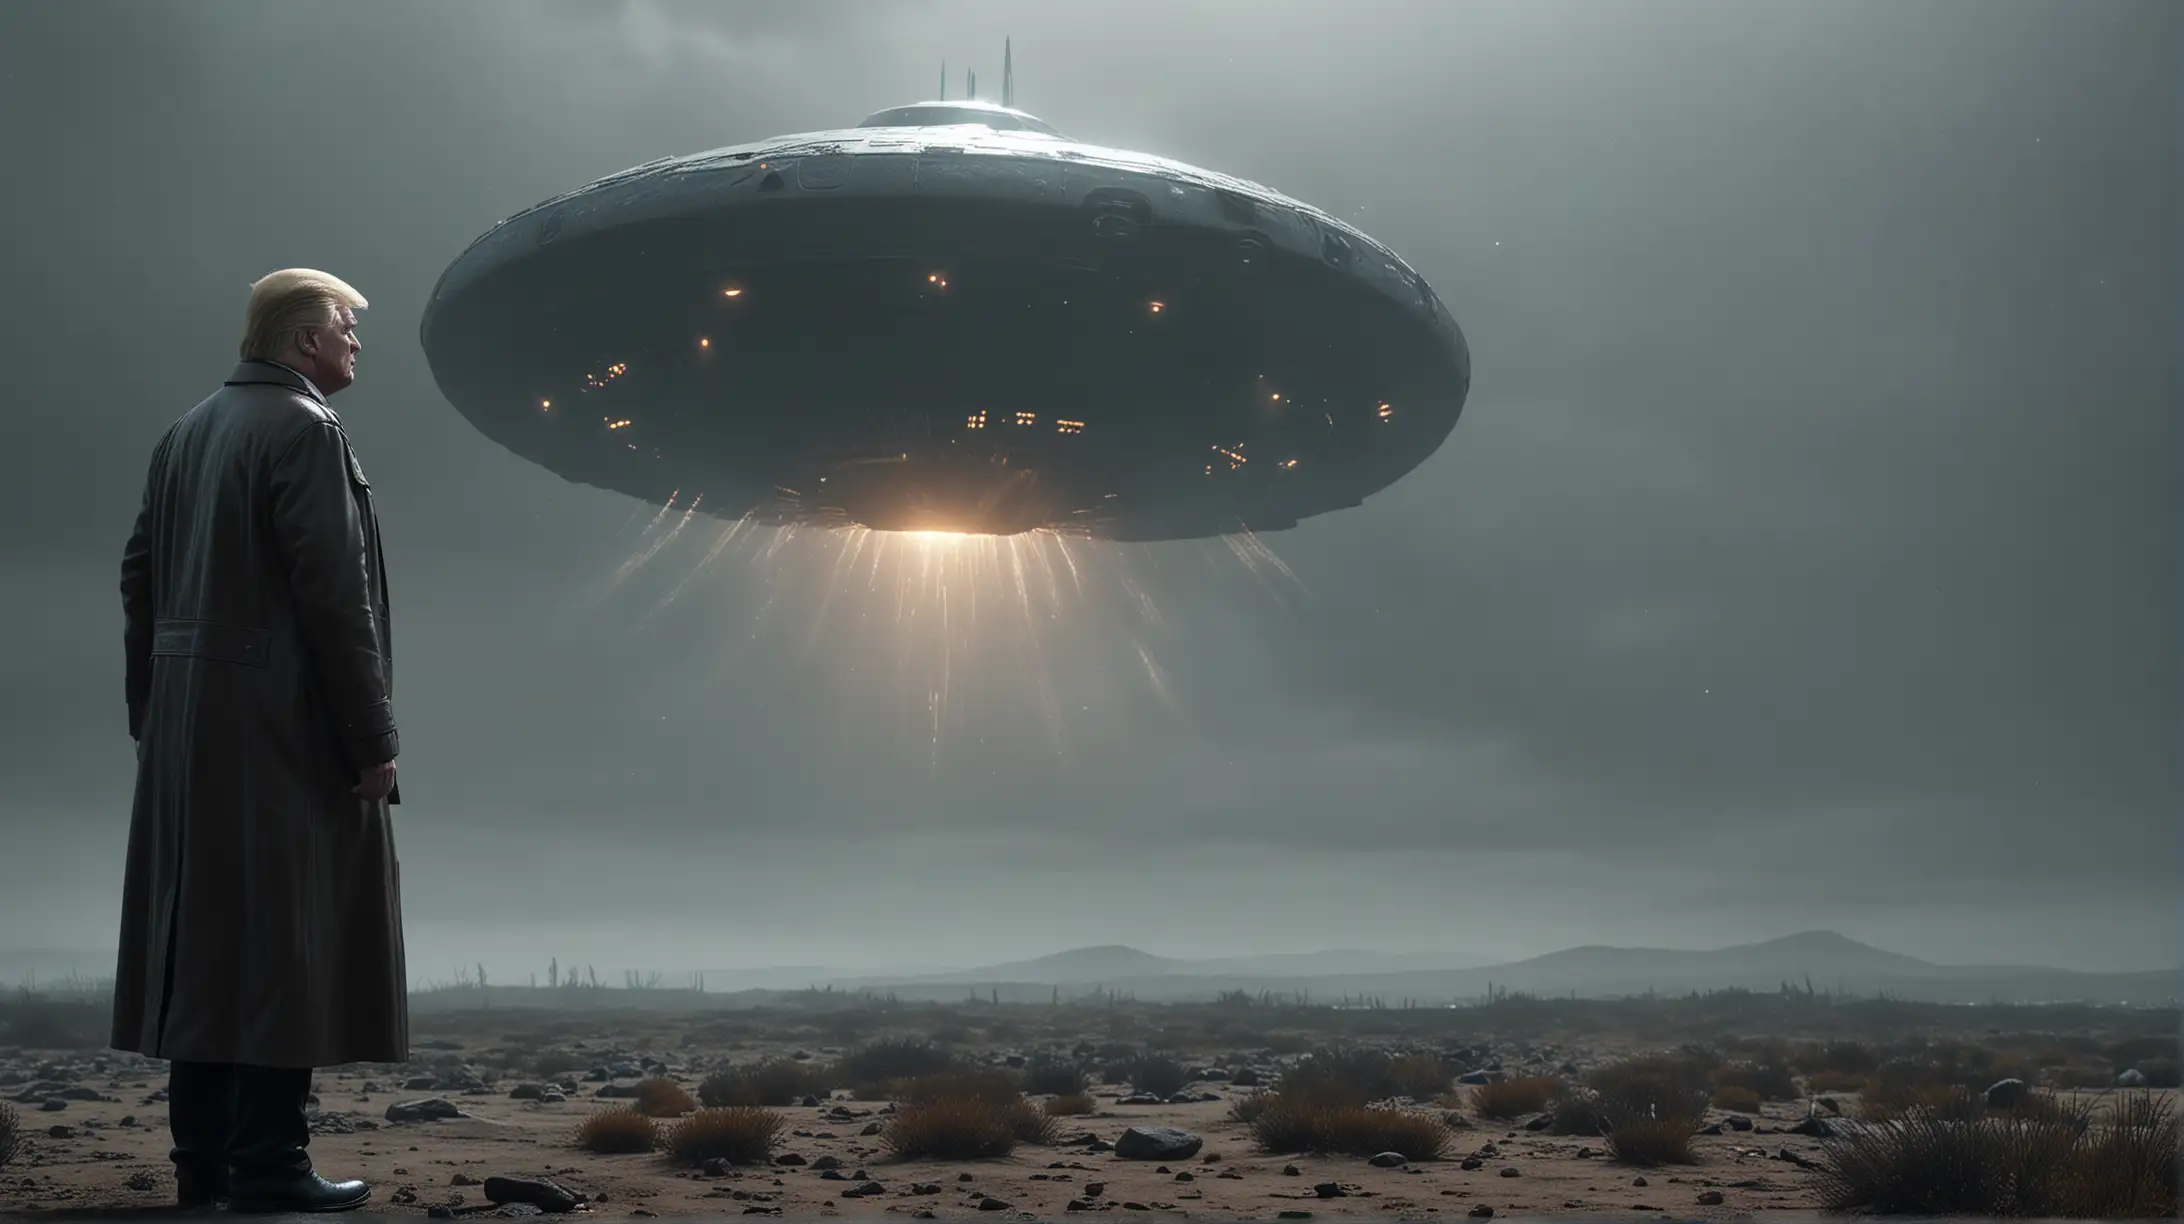 Mysterious UFO Encounter Donald Trump Discovers Alien Craft